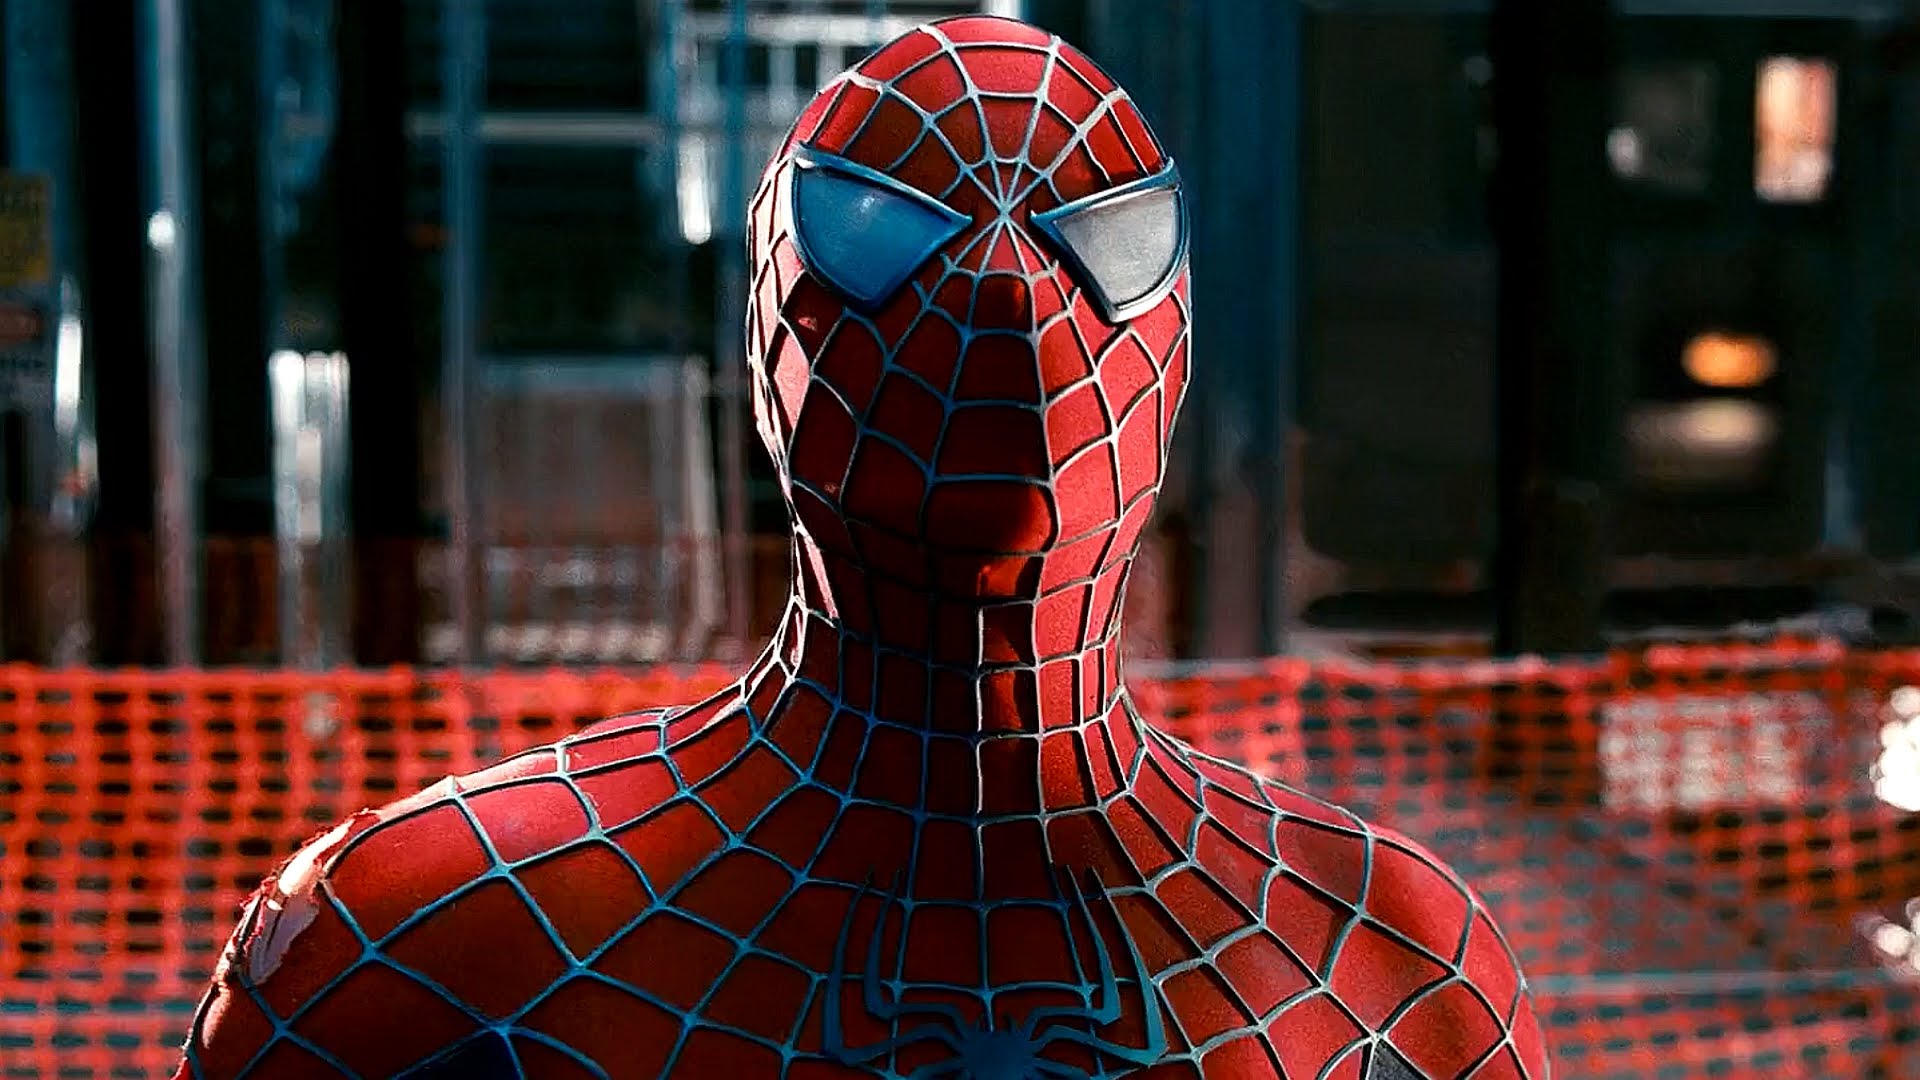 How Well Do You Actually Know Spider-Man?